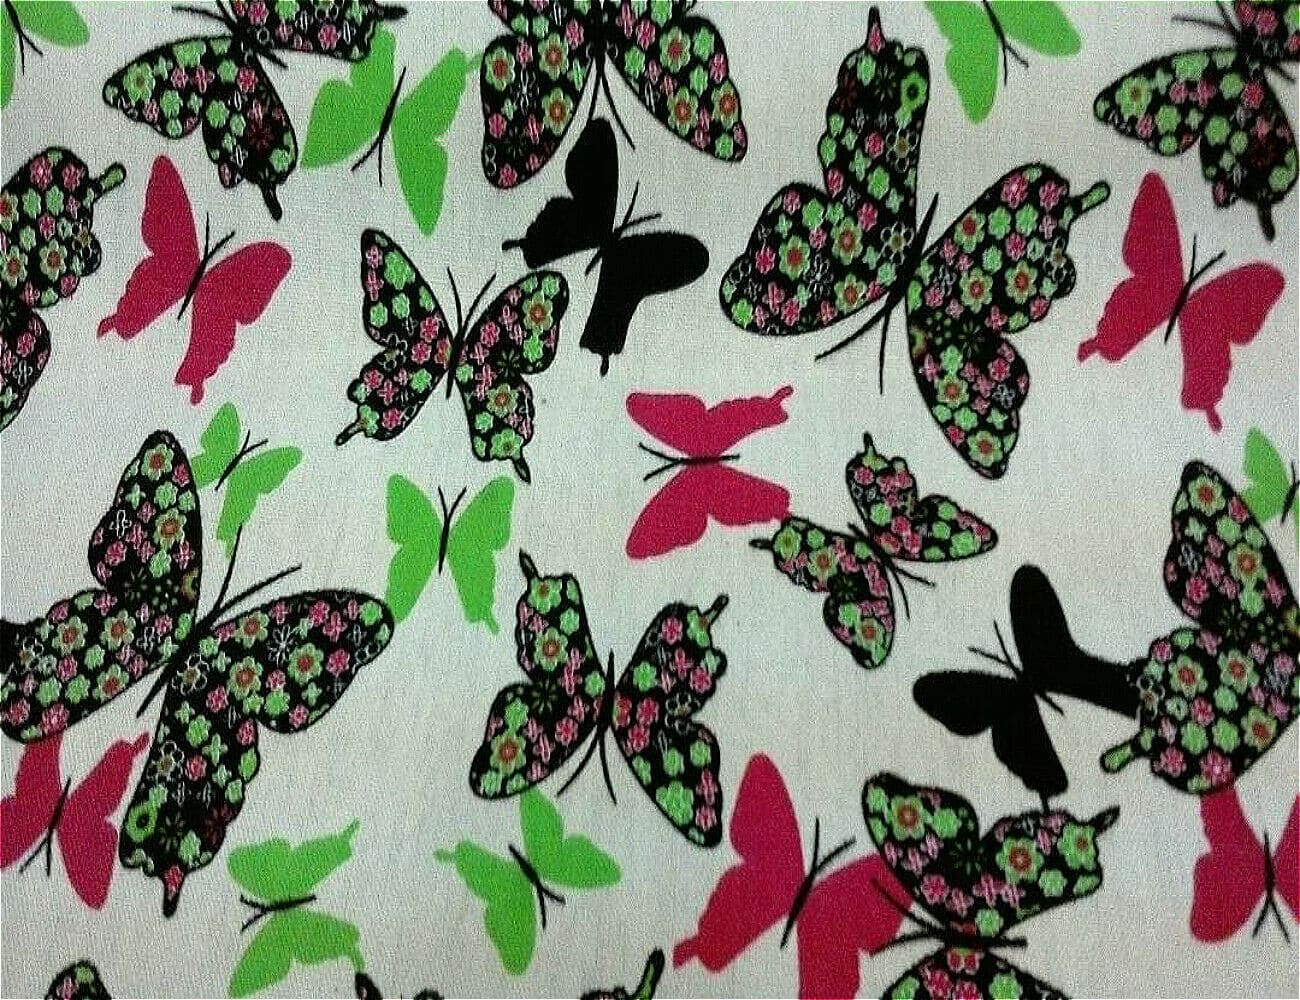 Large Butterfly Patterned Cotton Dress Fabric 